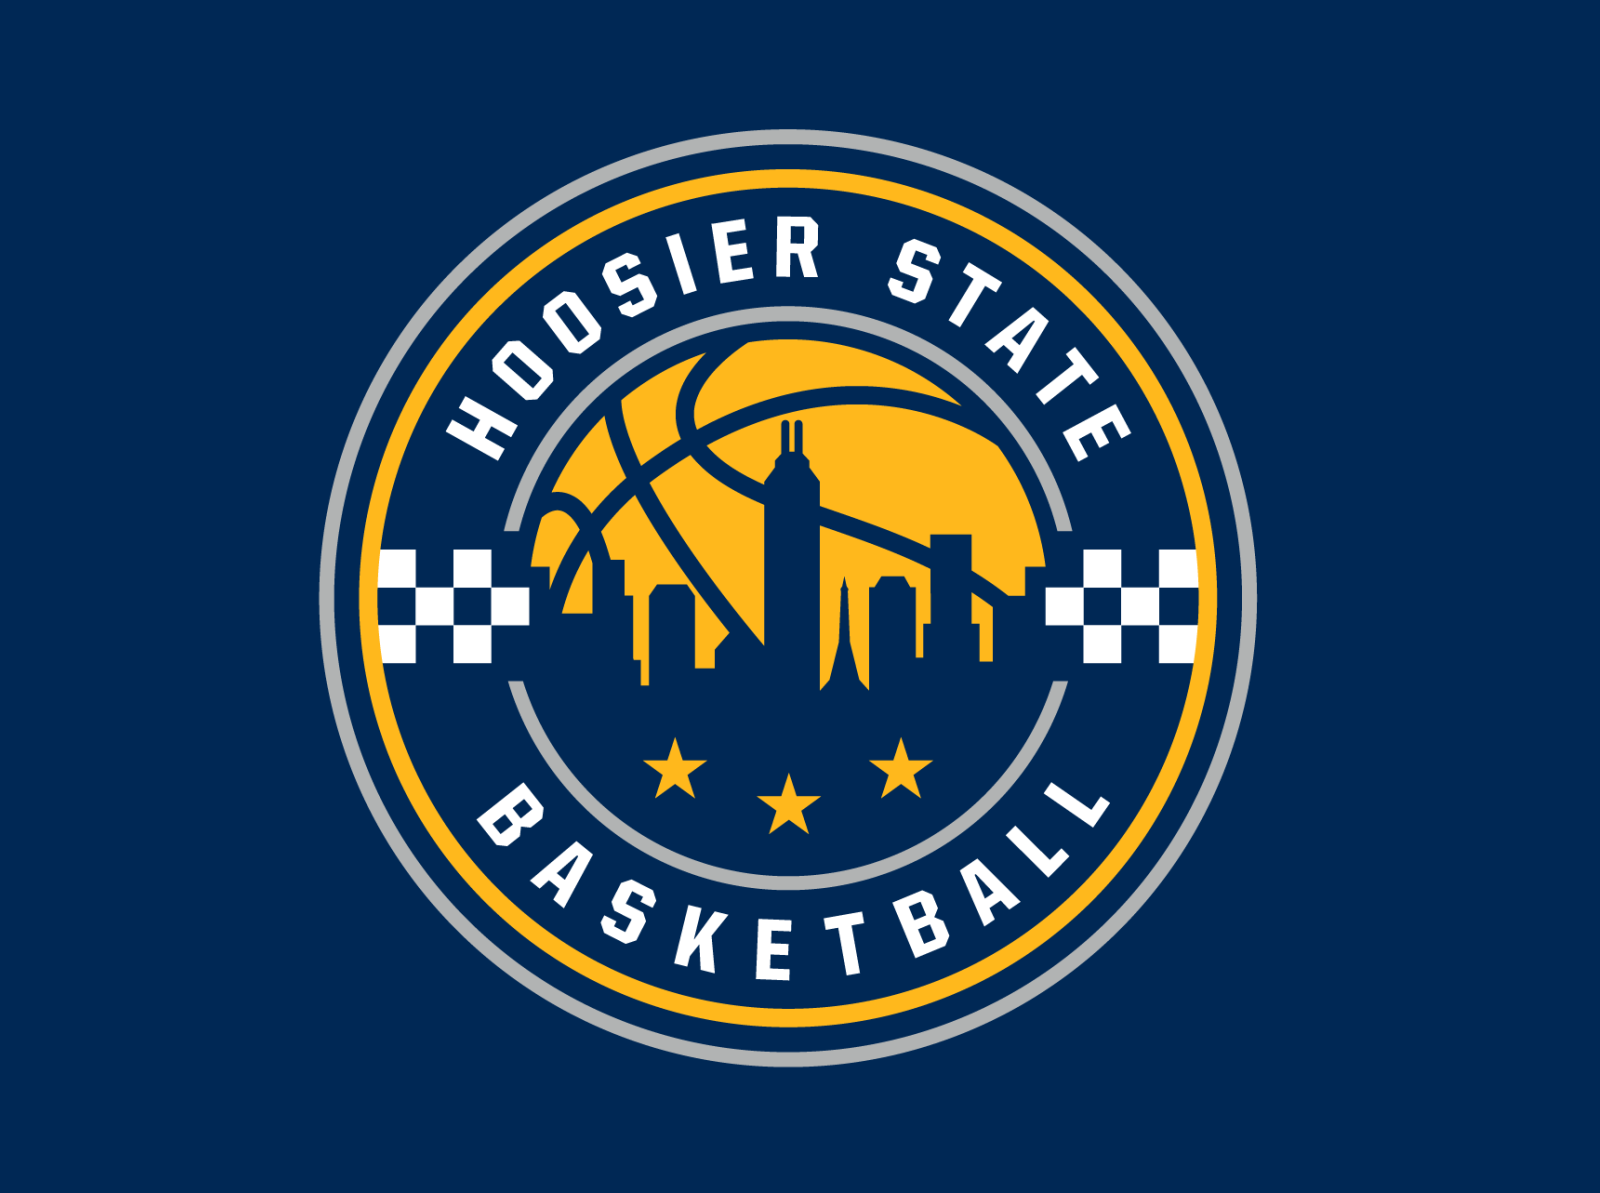 NBA | Indiana Pacers Alternate Logo by Alex Clemens on Dribbble